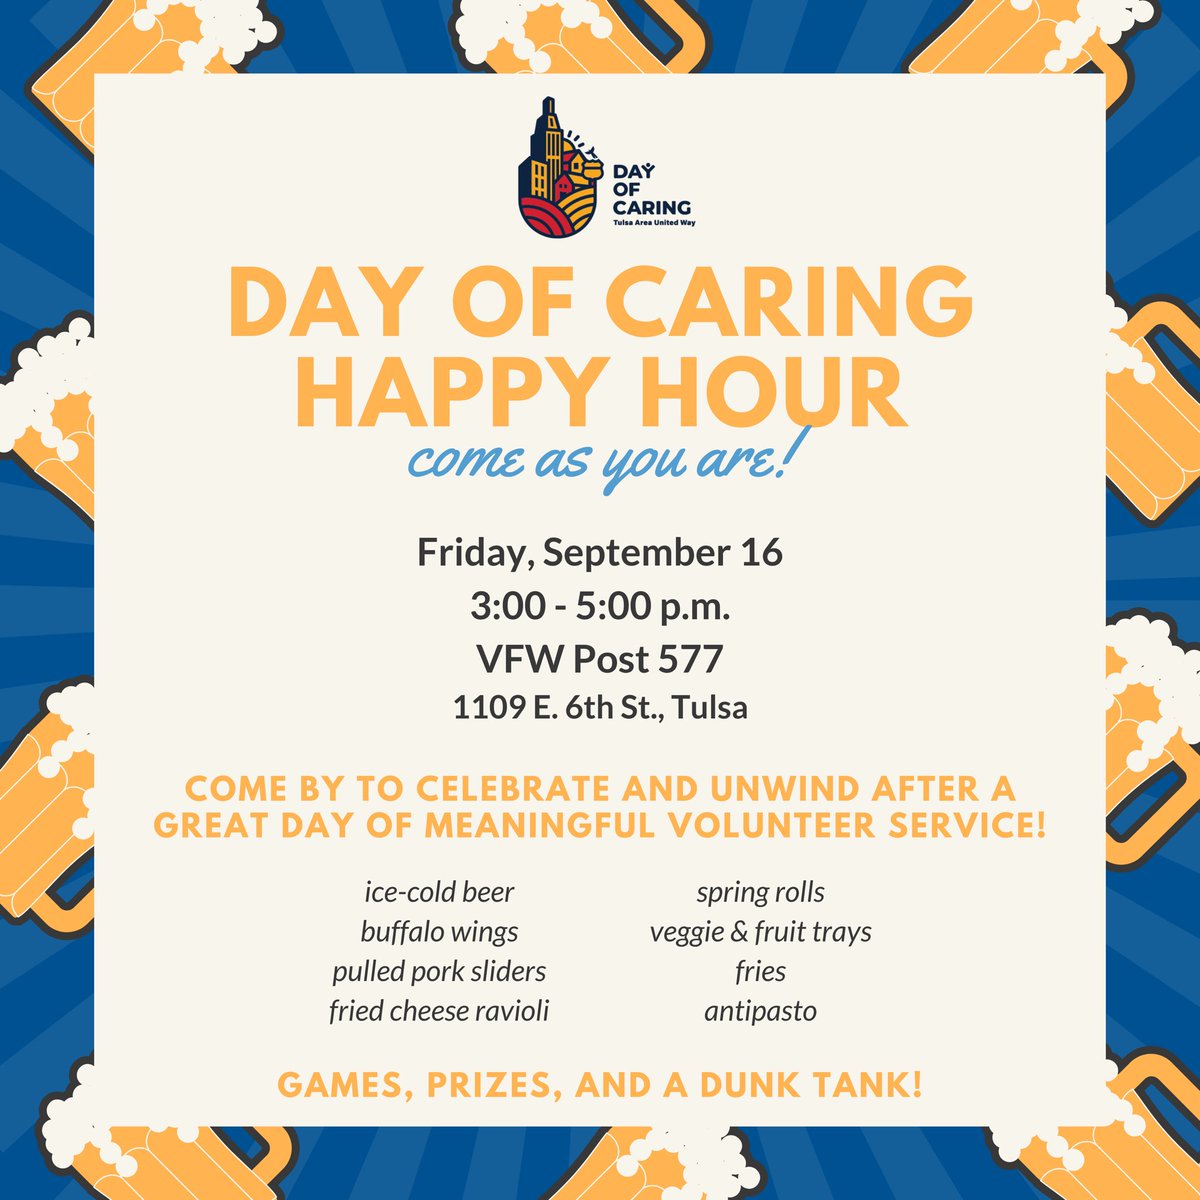 Come as you are and join us for a #DayOfCaring Happy Hour! 🍻 Stop by the Tulsa VFW after your project wraps up for ice-cold beer, food, games, prizes and more. Let’s celebrate the great work taking place in our community! Let us know you’re coming here: give.tauw.org/comm/SinglePag…